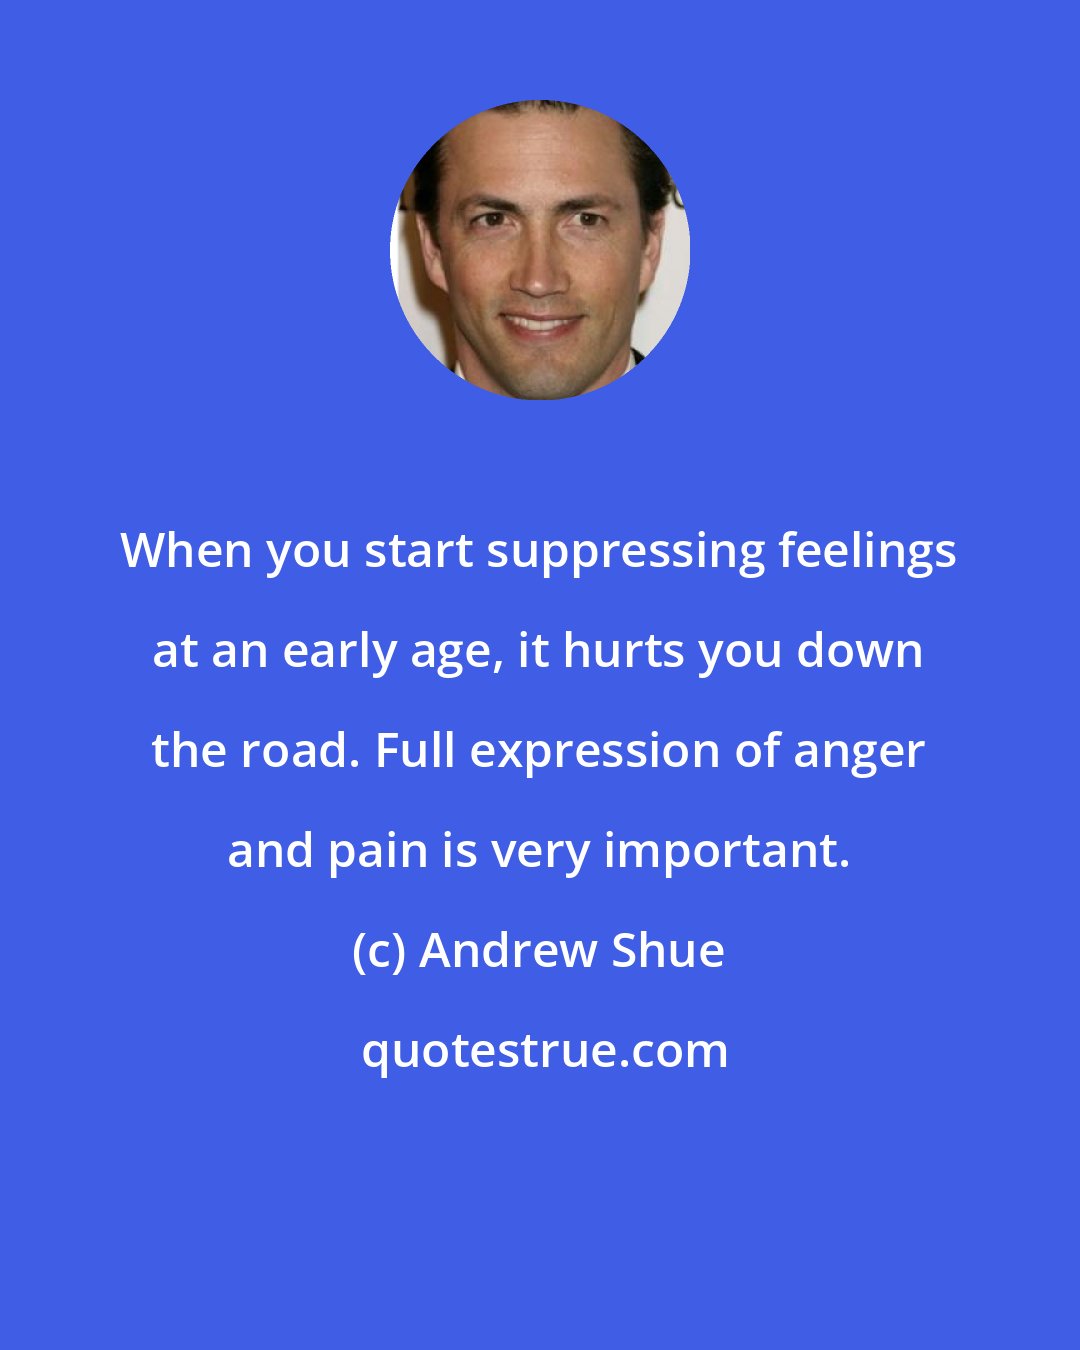 Andrew Shue: When you start suppressing feelings at an early age, it hurts you down the road. Full expression of anger and pain is very important.